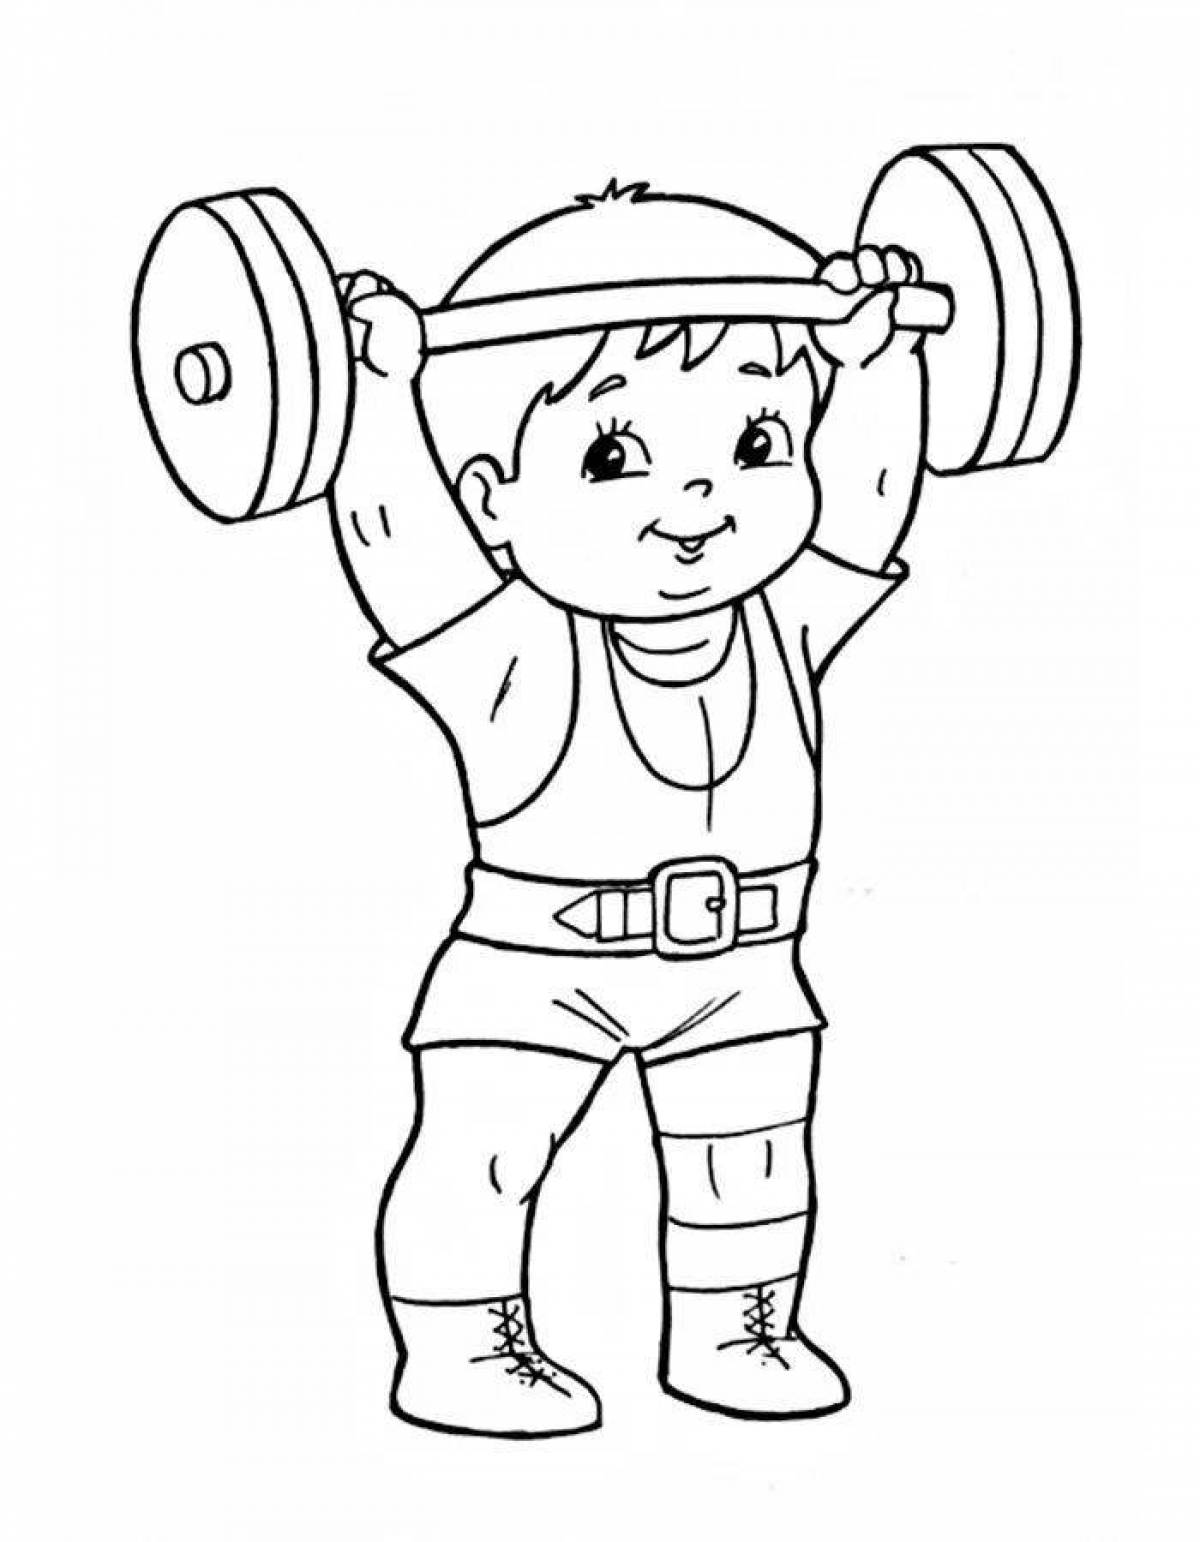 Energetic sportsmen coloring pages